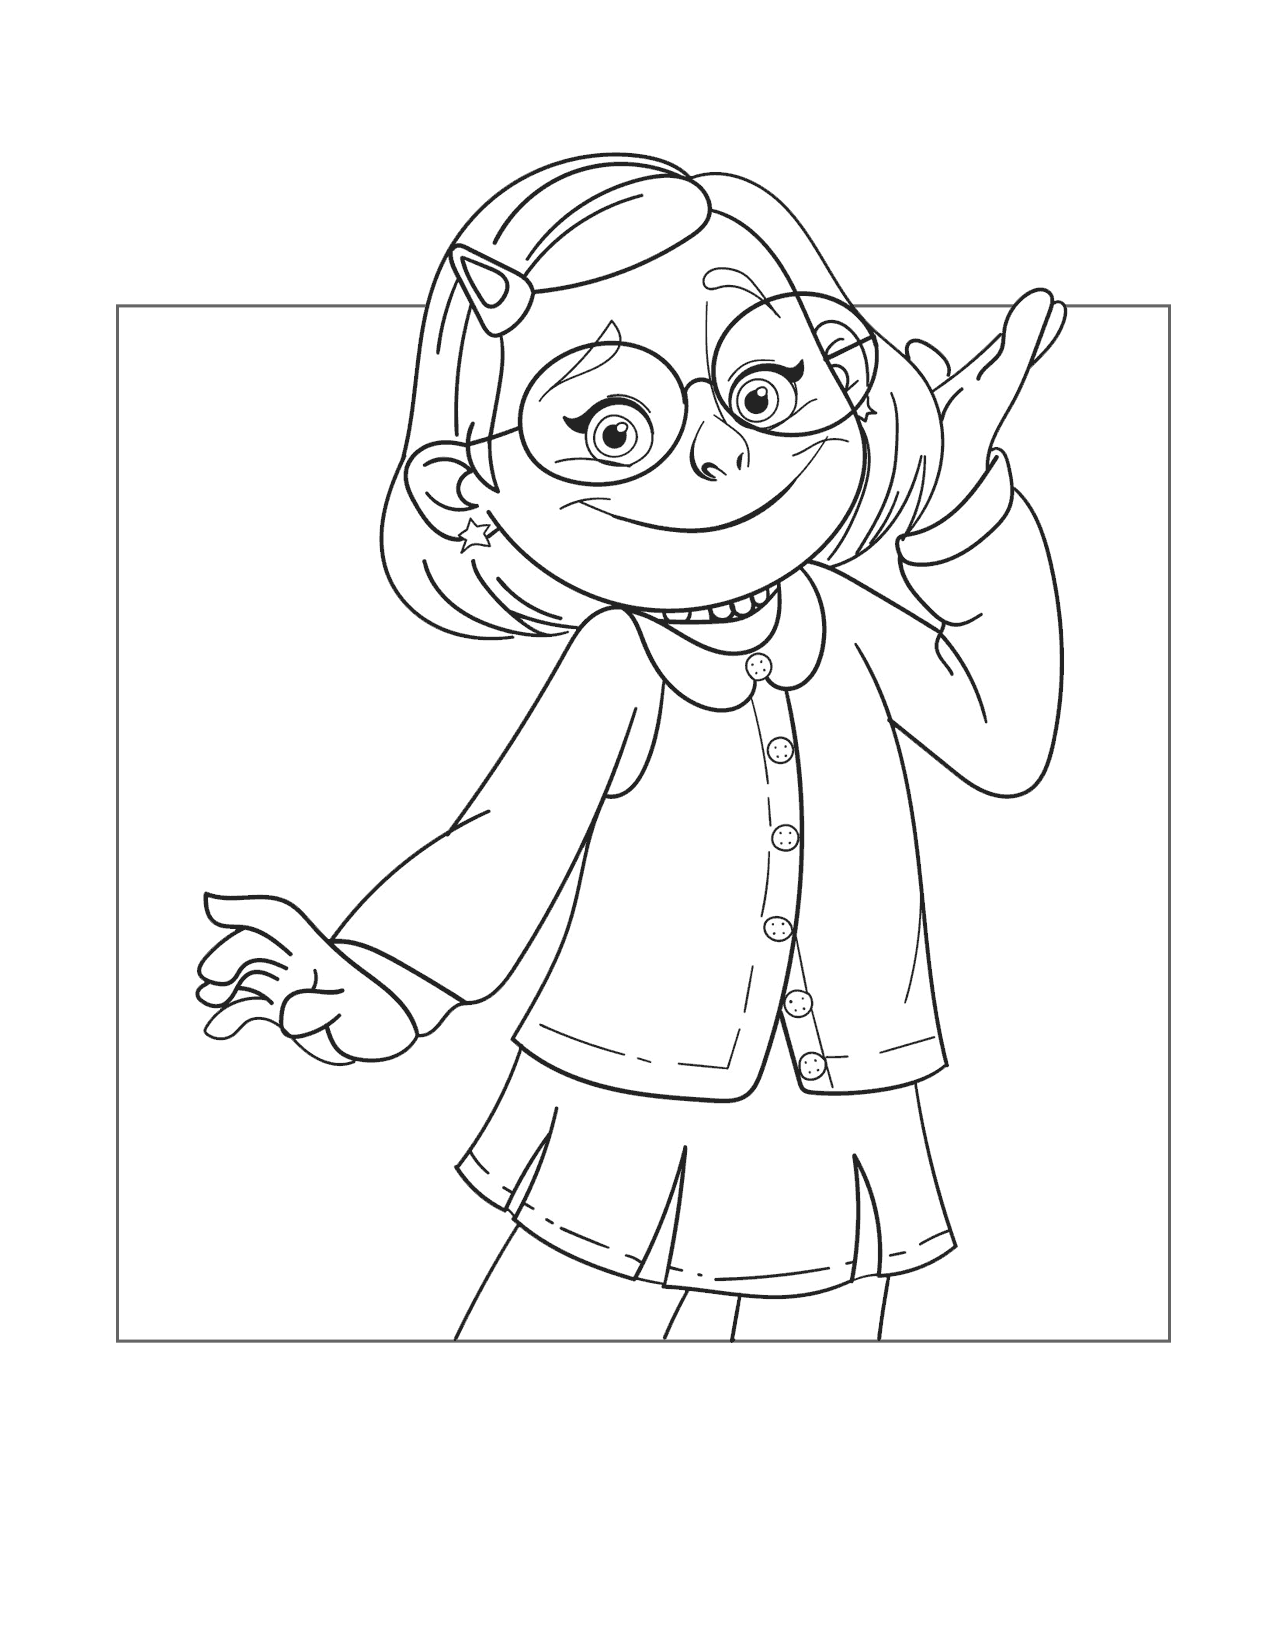 Cute Mei Turning Red Coloring Page